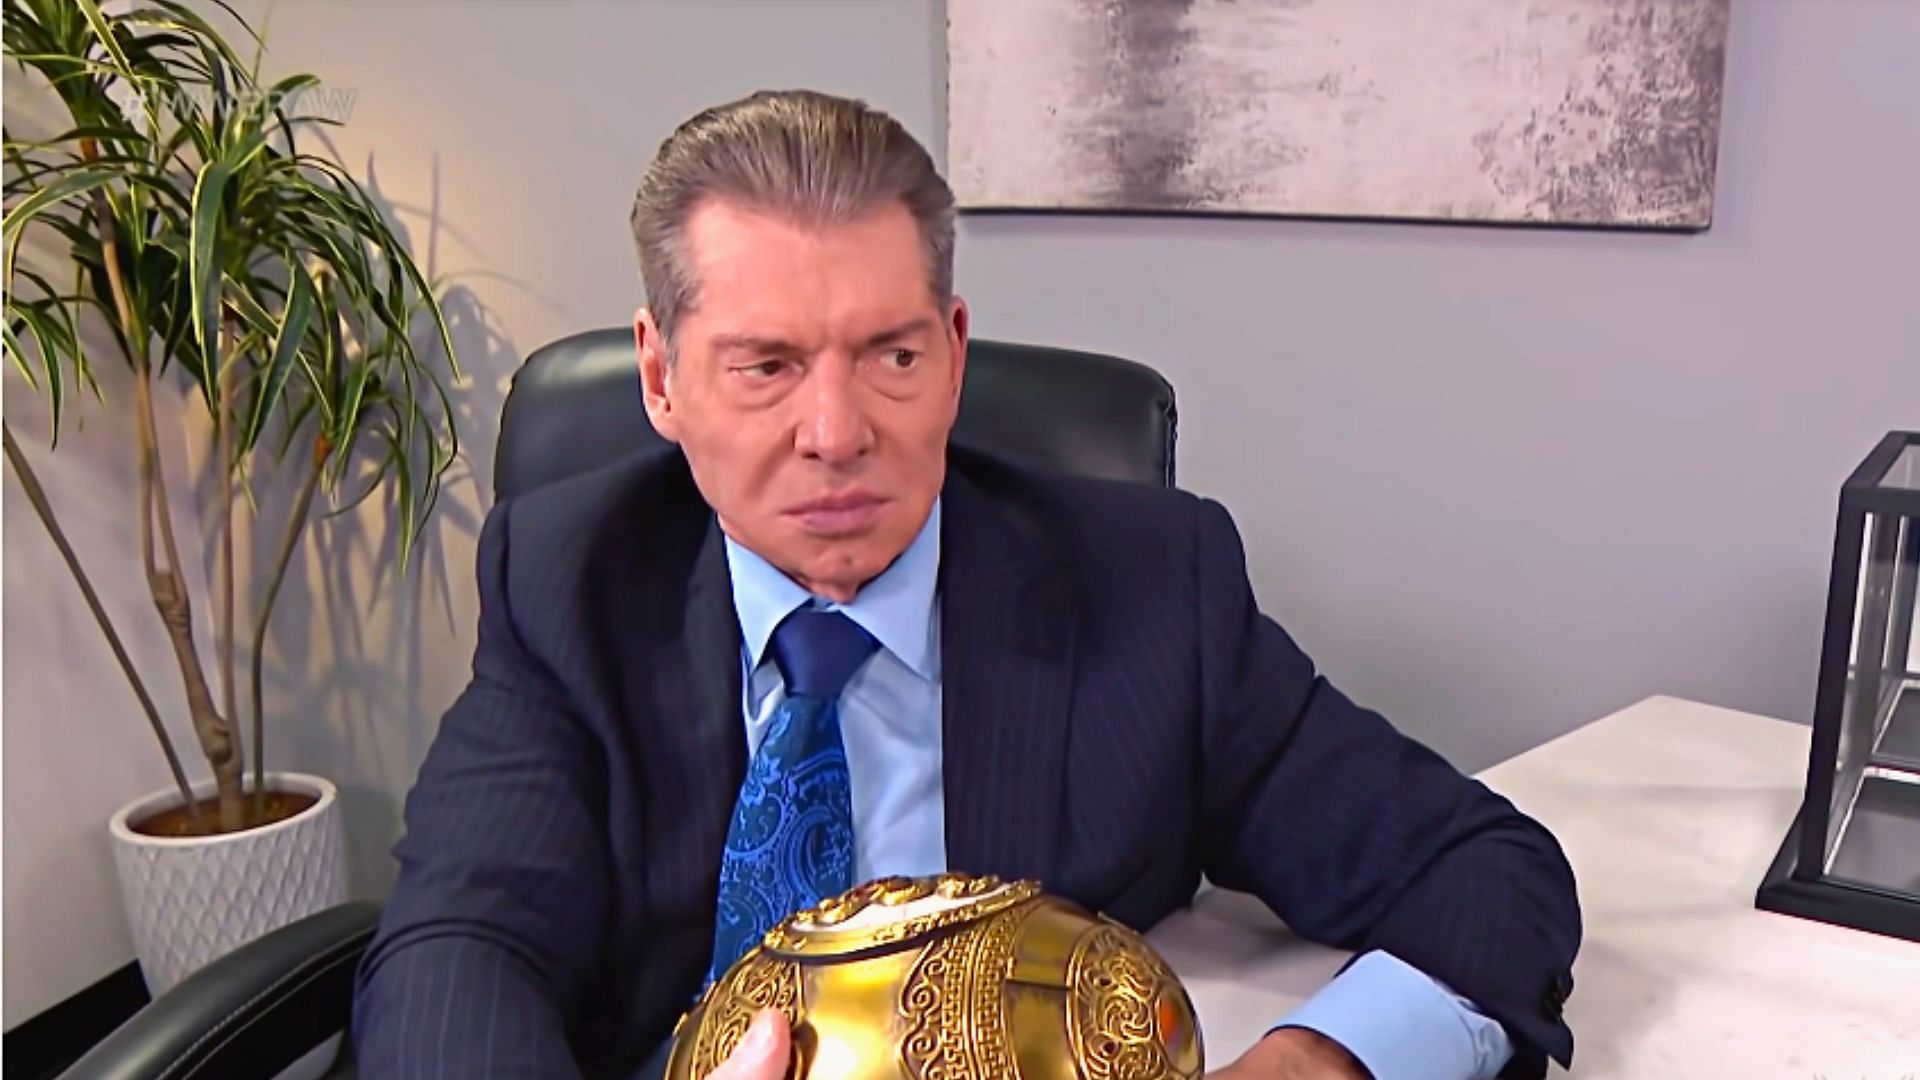 WWE Chairman Vince McMahon wanted a younger Michael Cole to replace Jim Ross